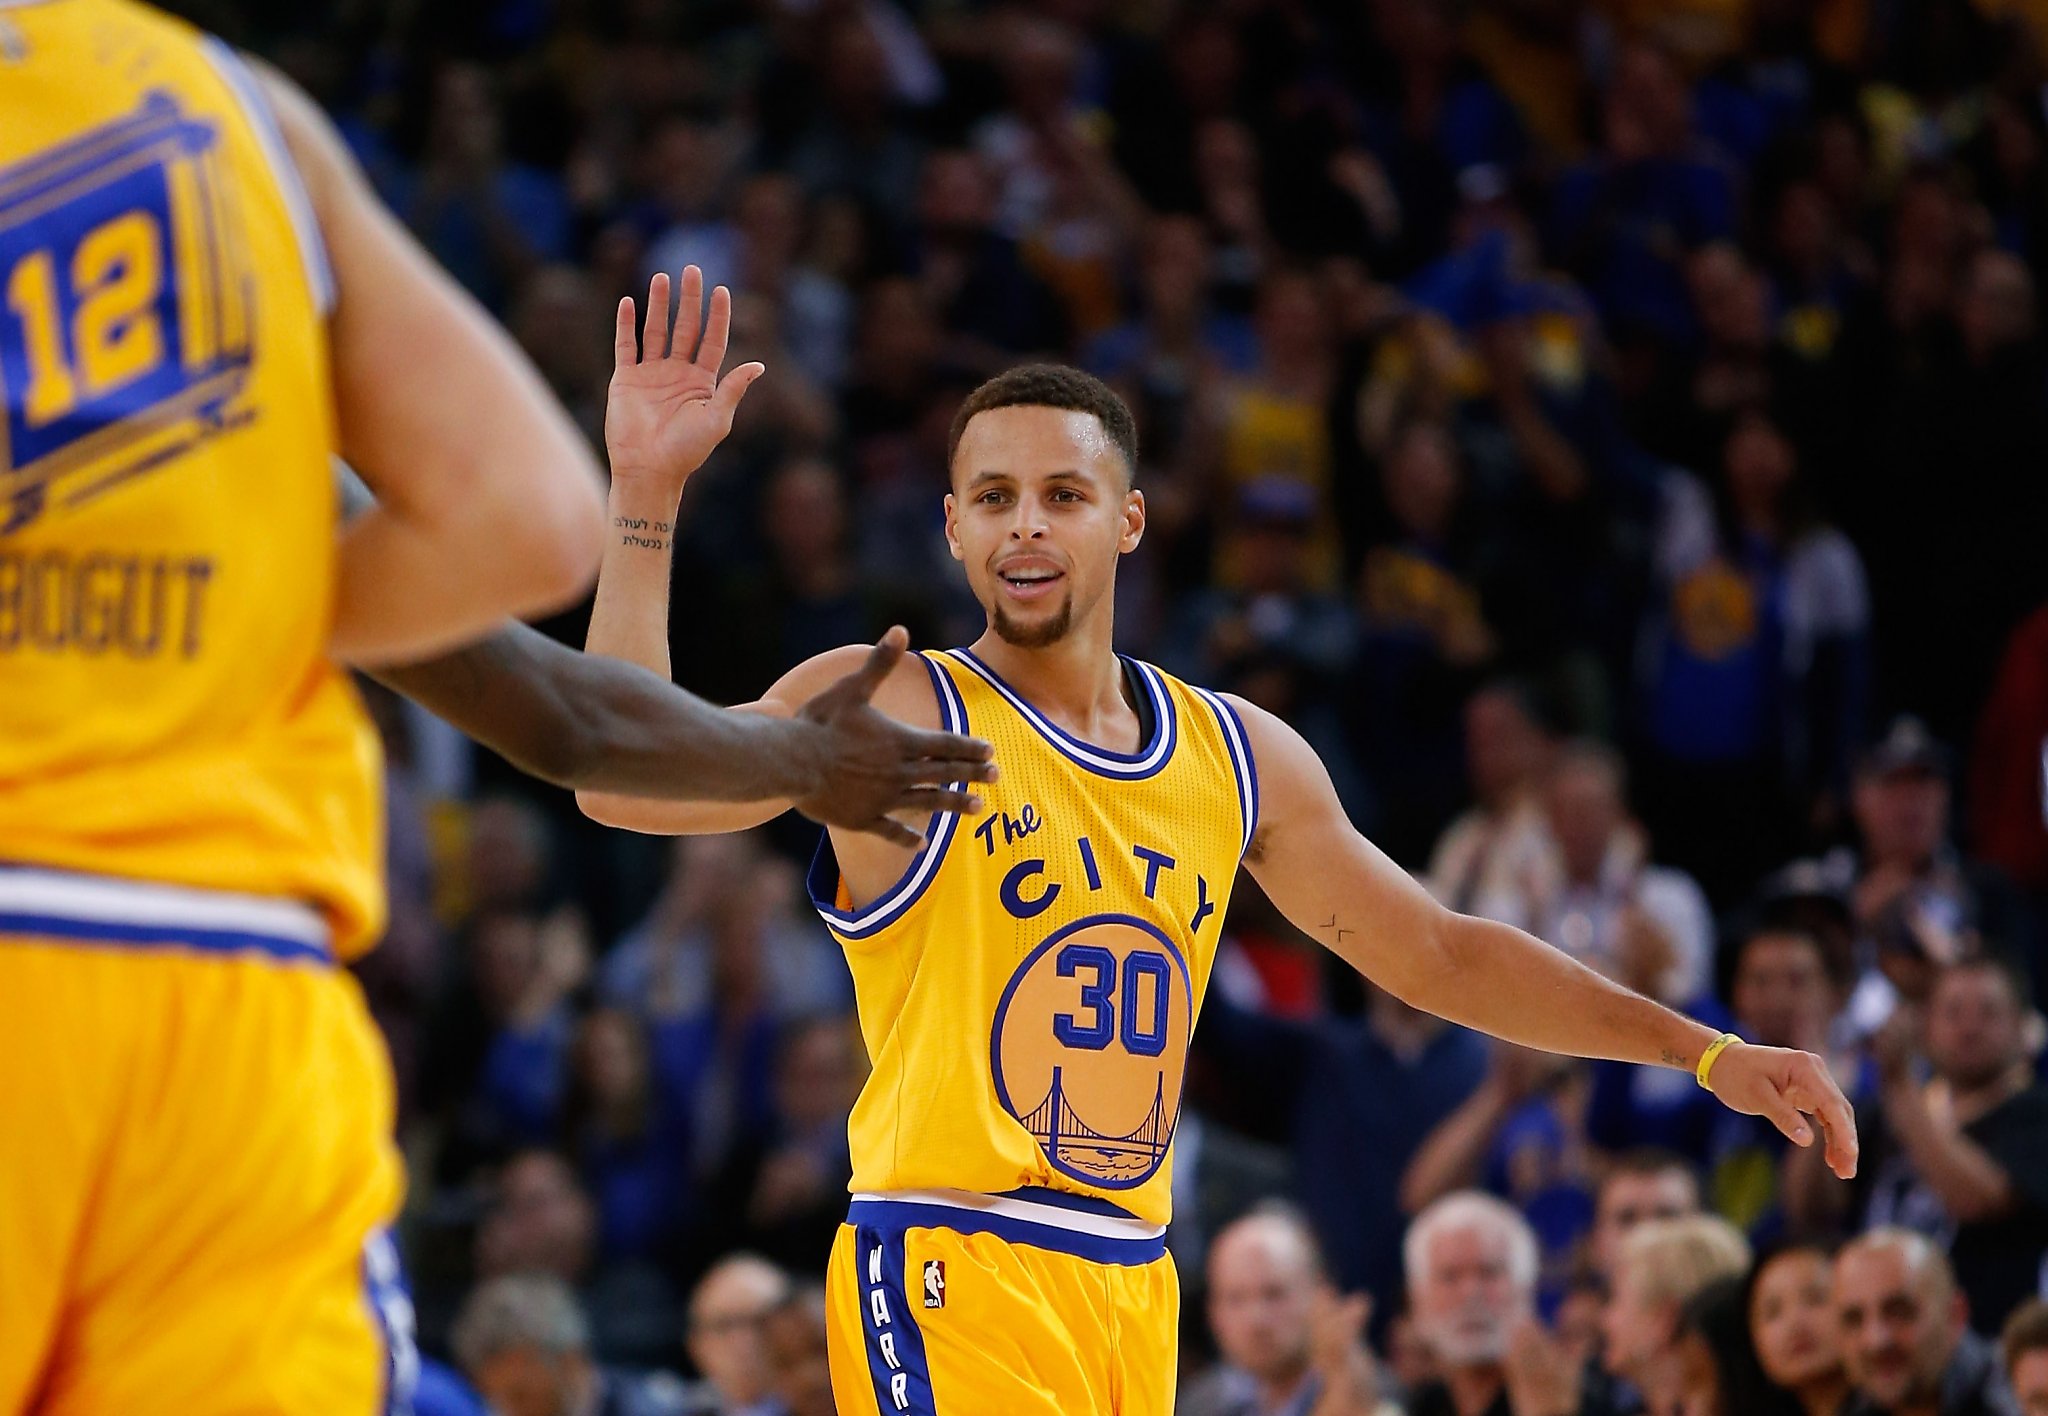 Why Does Warriors' Steph Curry Wear the #30 Jersey in NBA